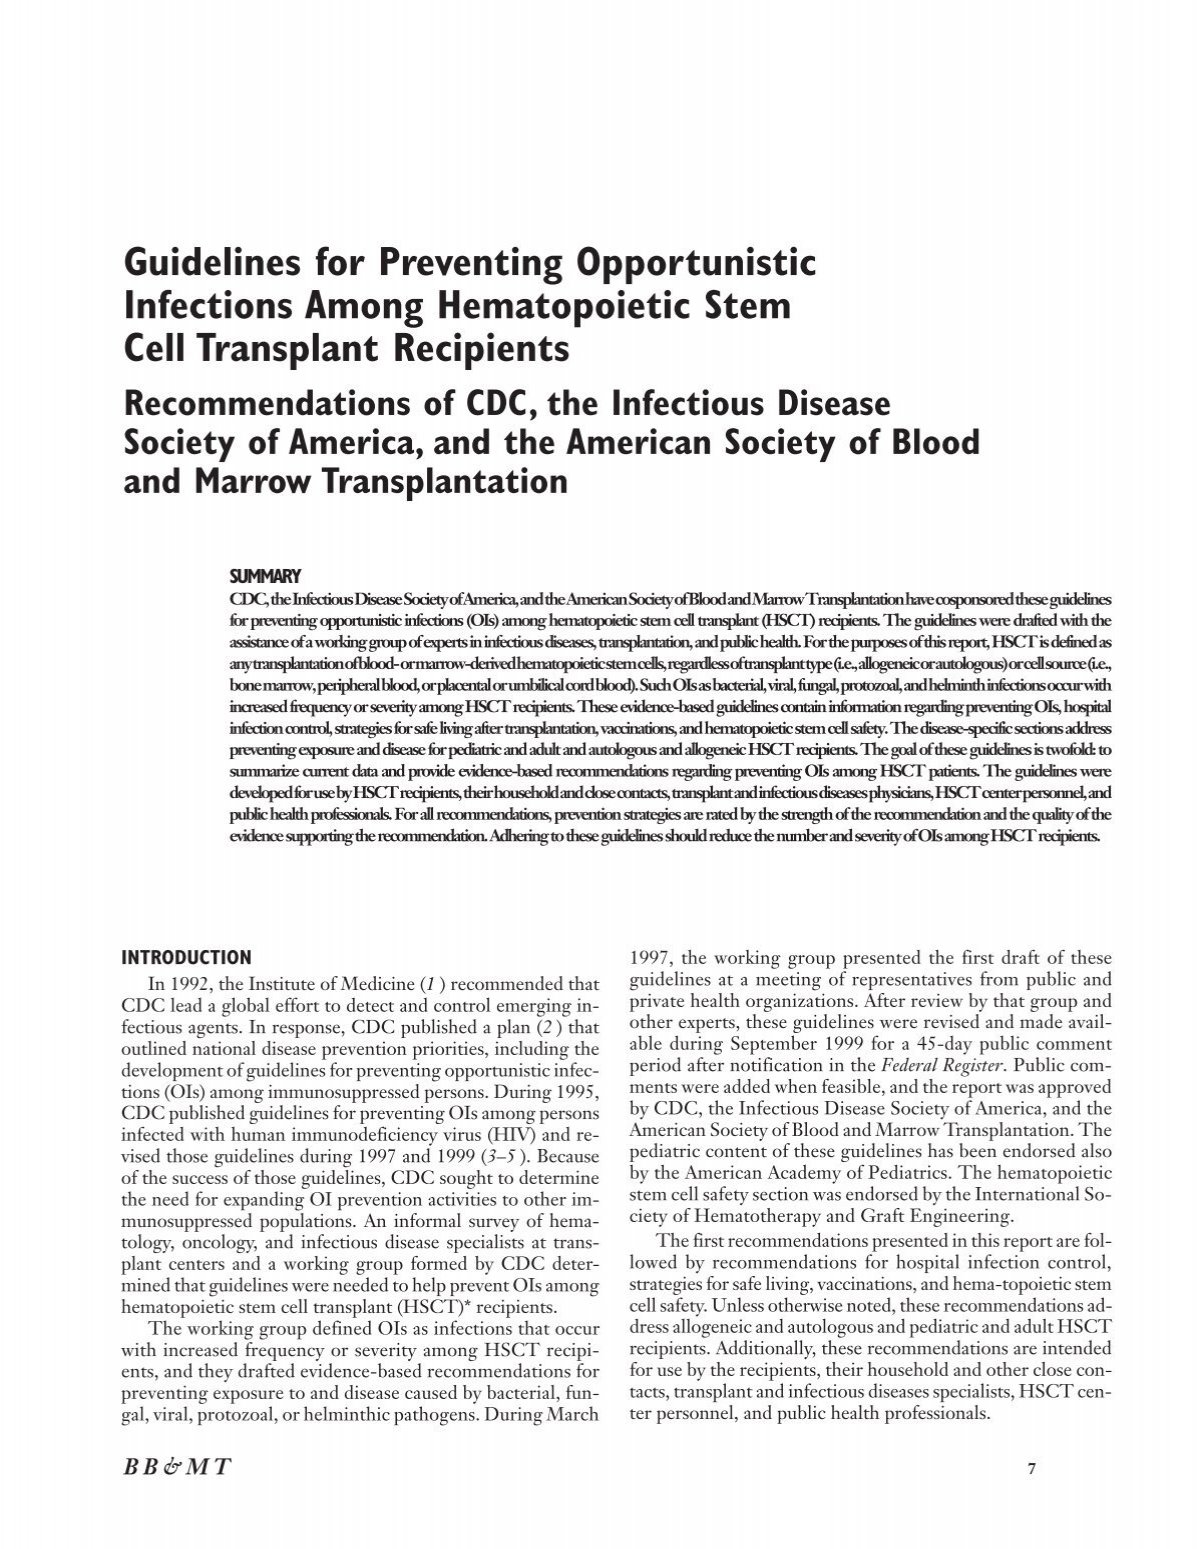 Guidelines for Preventing Opportunistic Infections Among Hematopoietic Stem  Cell Transplant Recipients